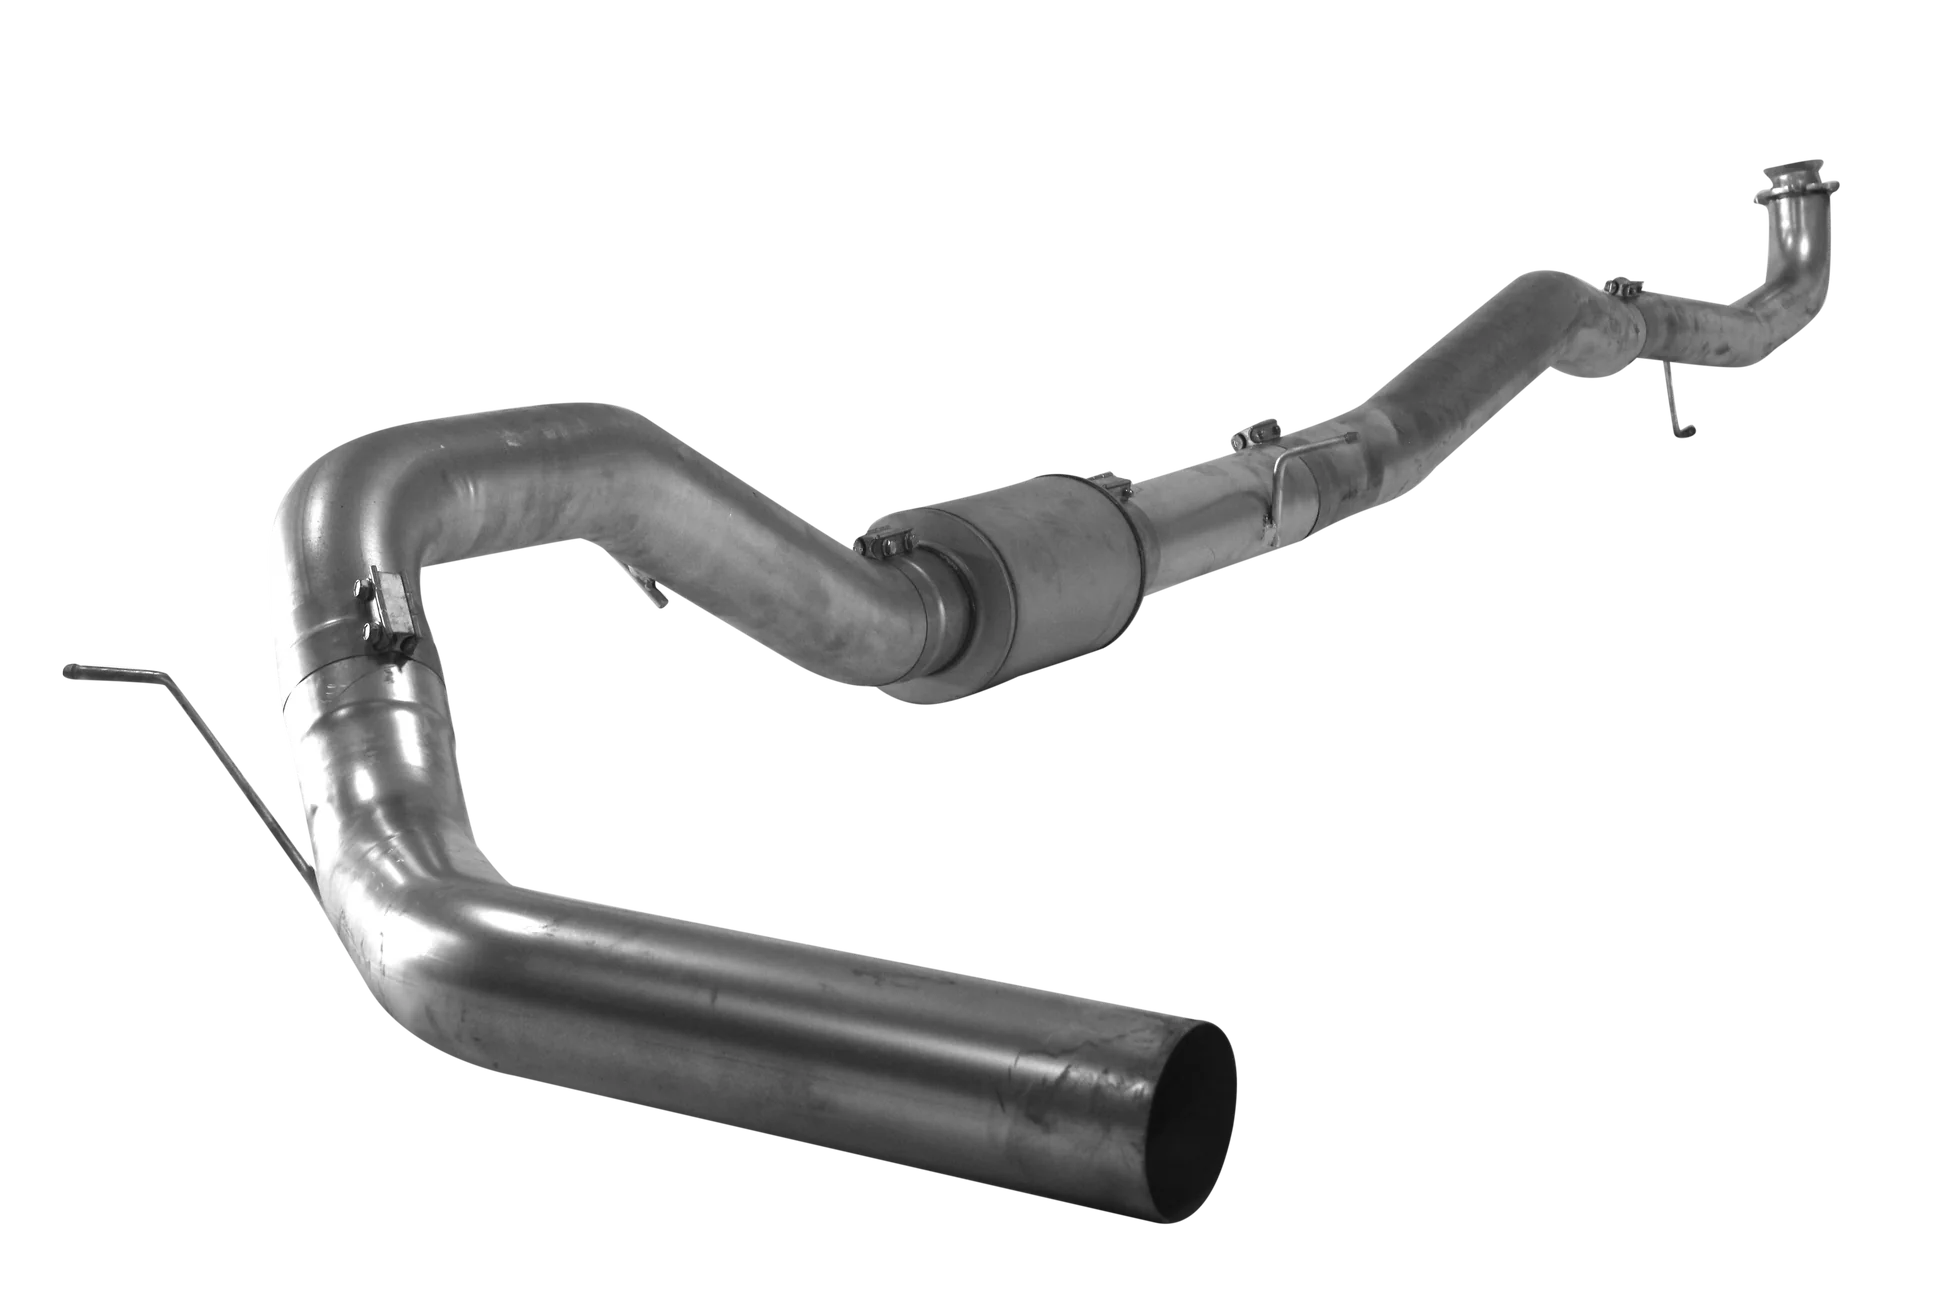 431027 431028 432027 432028 Mel's Manufacturing 4" Downpipe Back Single | 2020-2023 GM 2500/3500 6.6L DURAMAX L5P  Mels Mfg FloPro Flo-Pro Flo Pro Hell On Wheels Performance Ltd Limited Canadian Owned and Operated Online Diesel Parts Distribution & Wholesale Supply Center in Alberta Canada Shipping Supplying to Alberta British Columbia Sask Saskatchewan Manitoba Ontario Quebec Newfoundland Labrador New Brunswick Nova Scotia Prince Edward Island AB BC SK MB ON QC PQ NS NB NFLD N.L. PEI